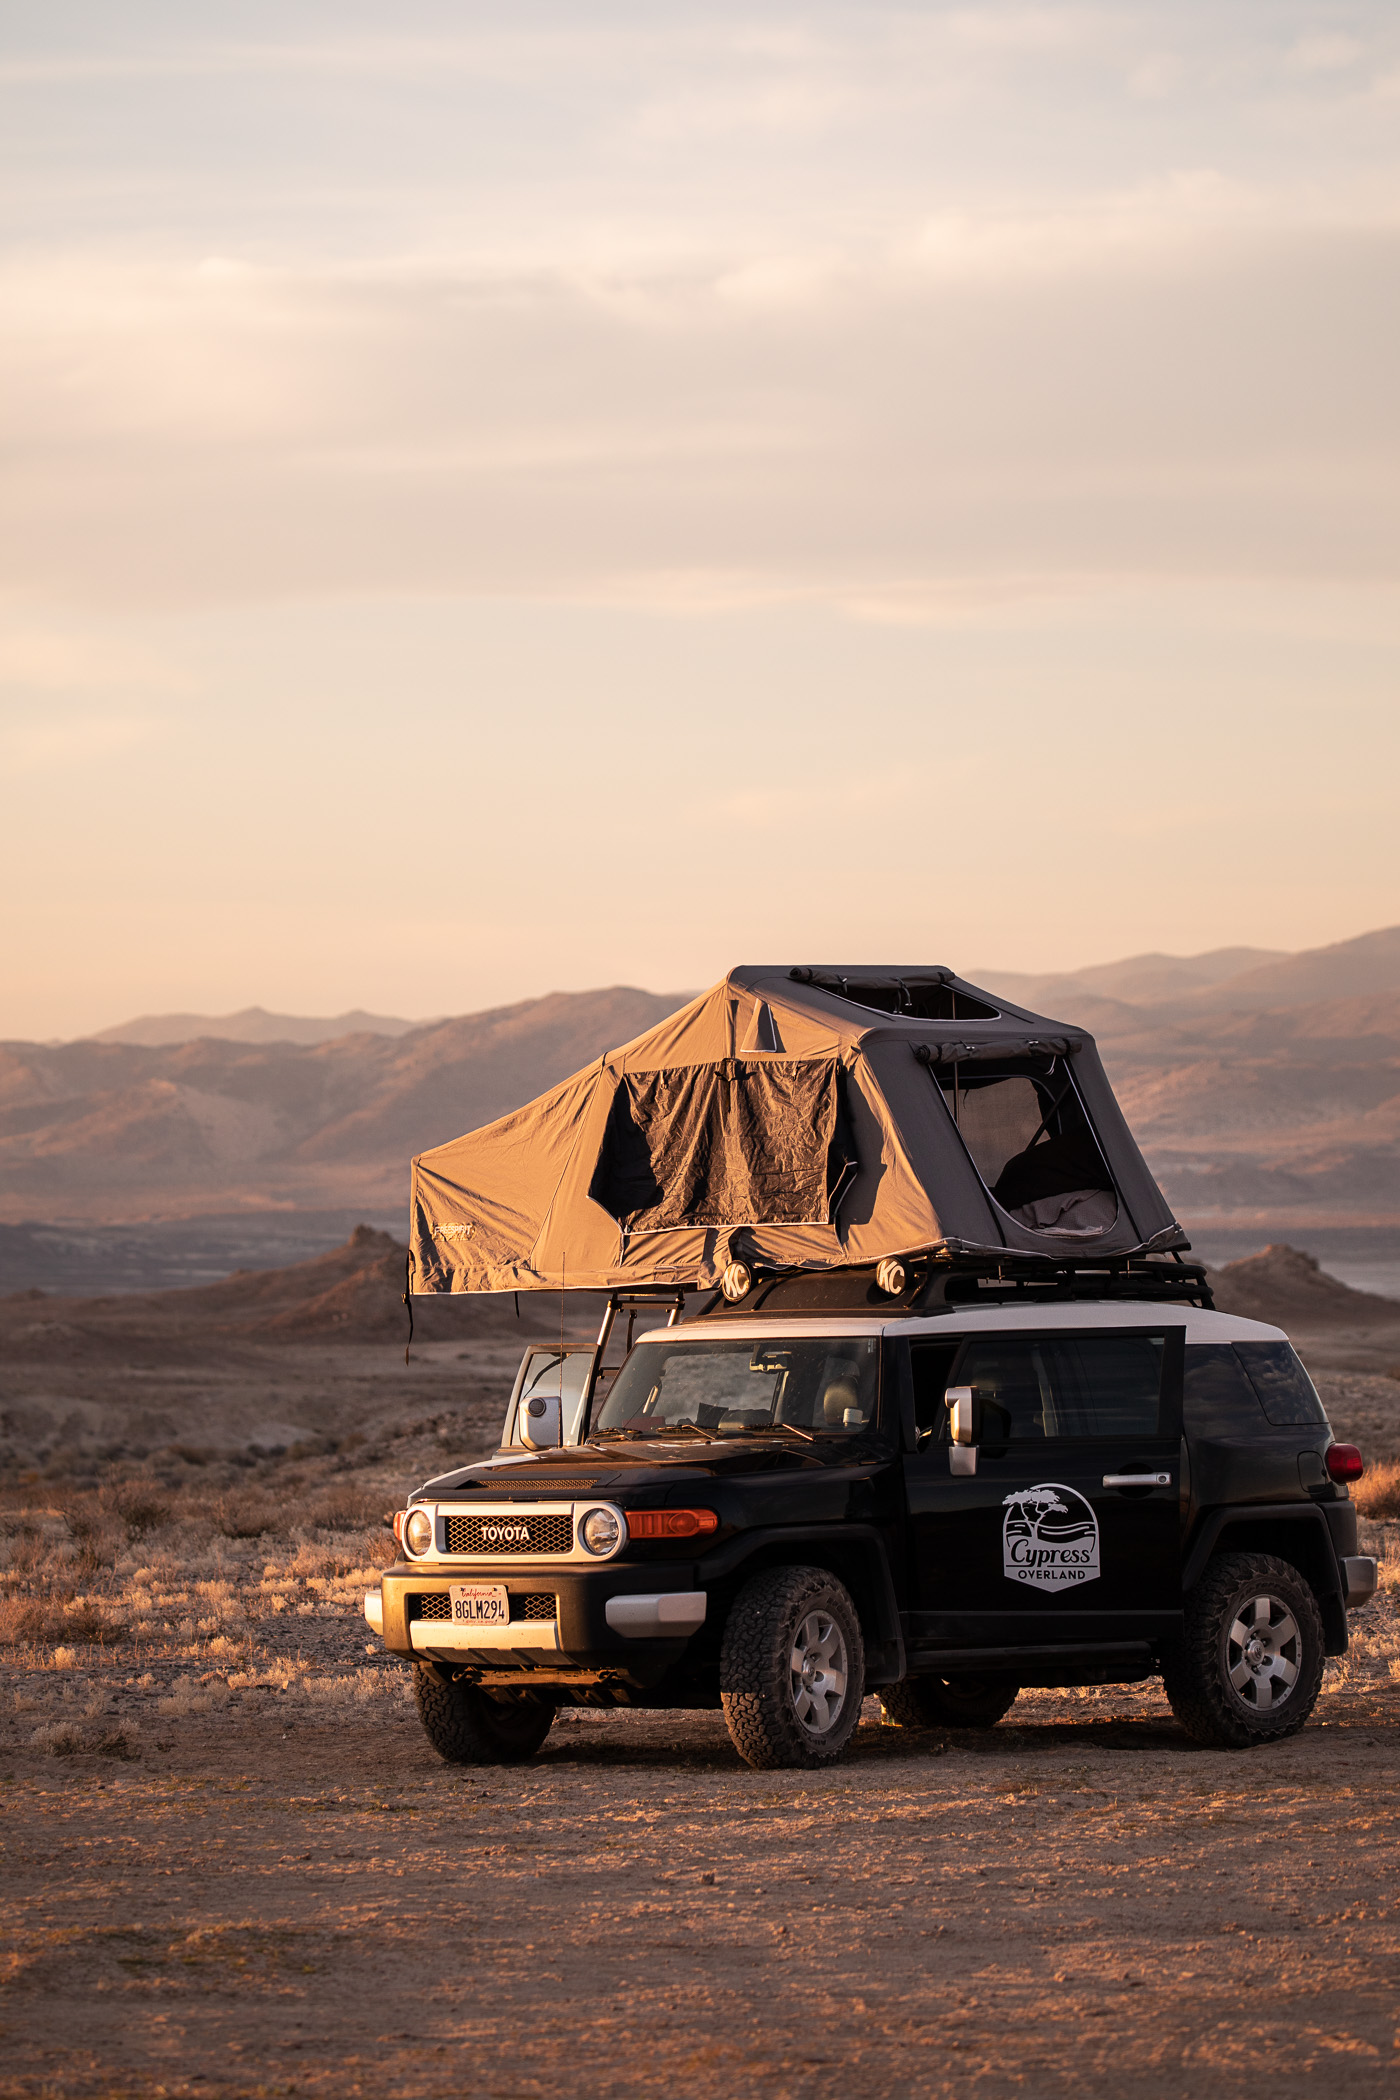 Overlanding 101 at Trona Pinnacles - An out-of-this-world road trip through California